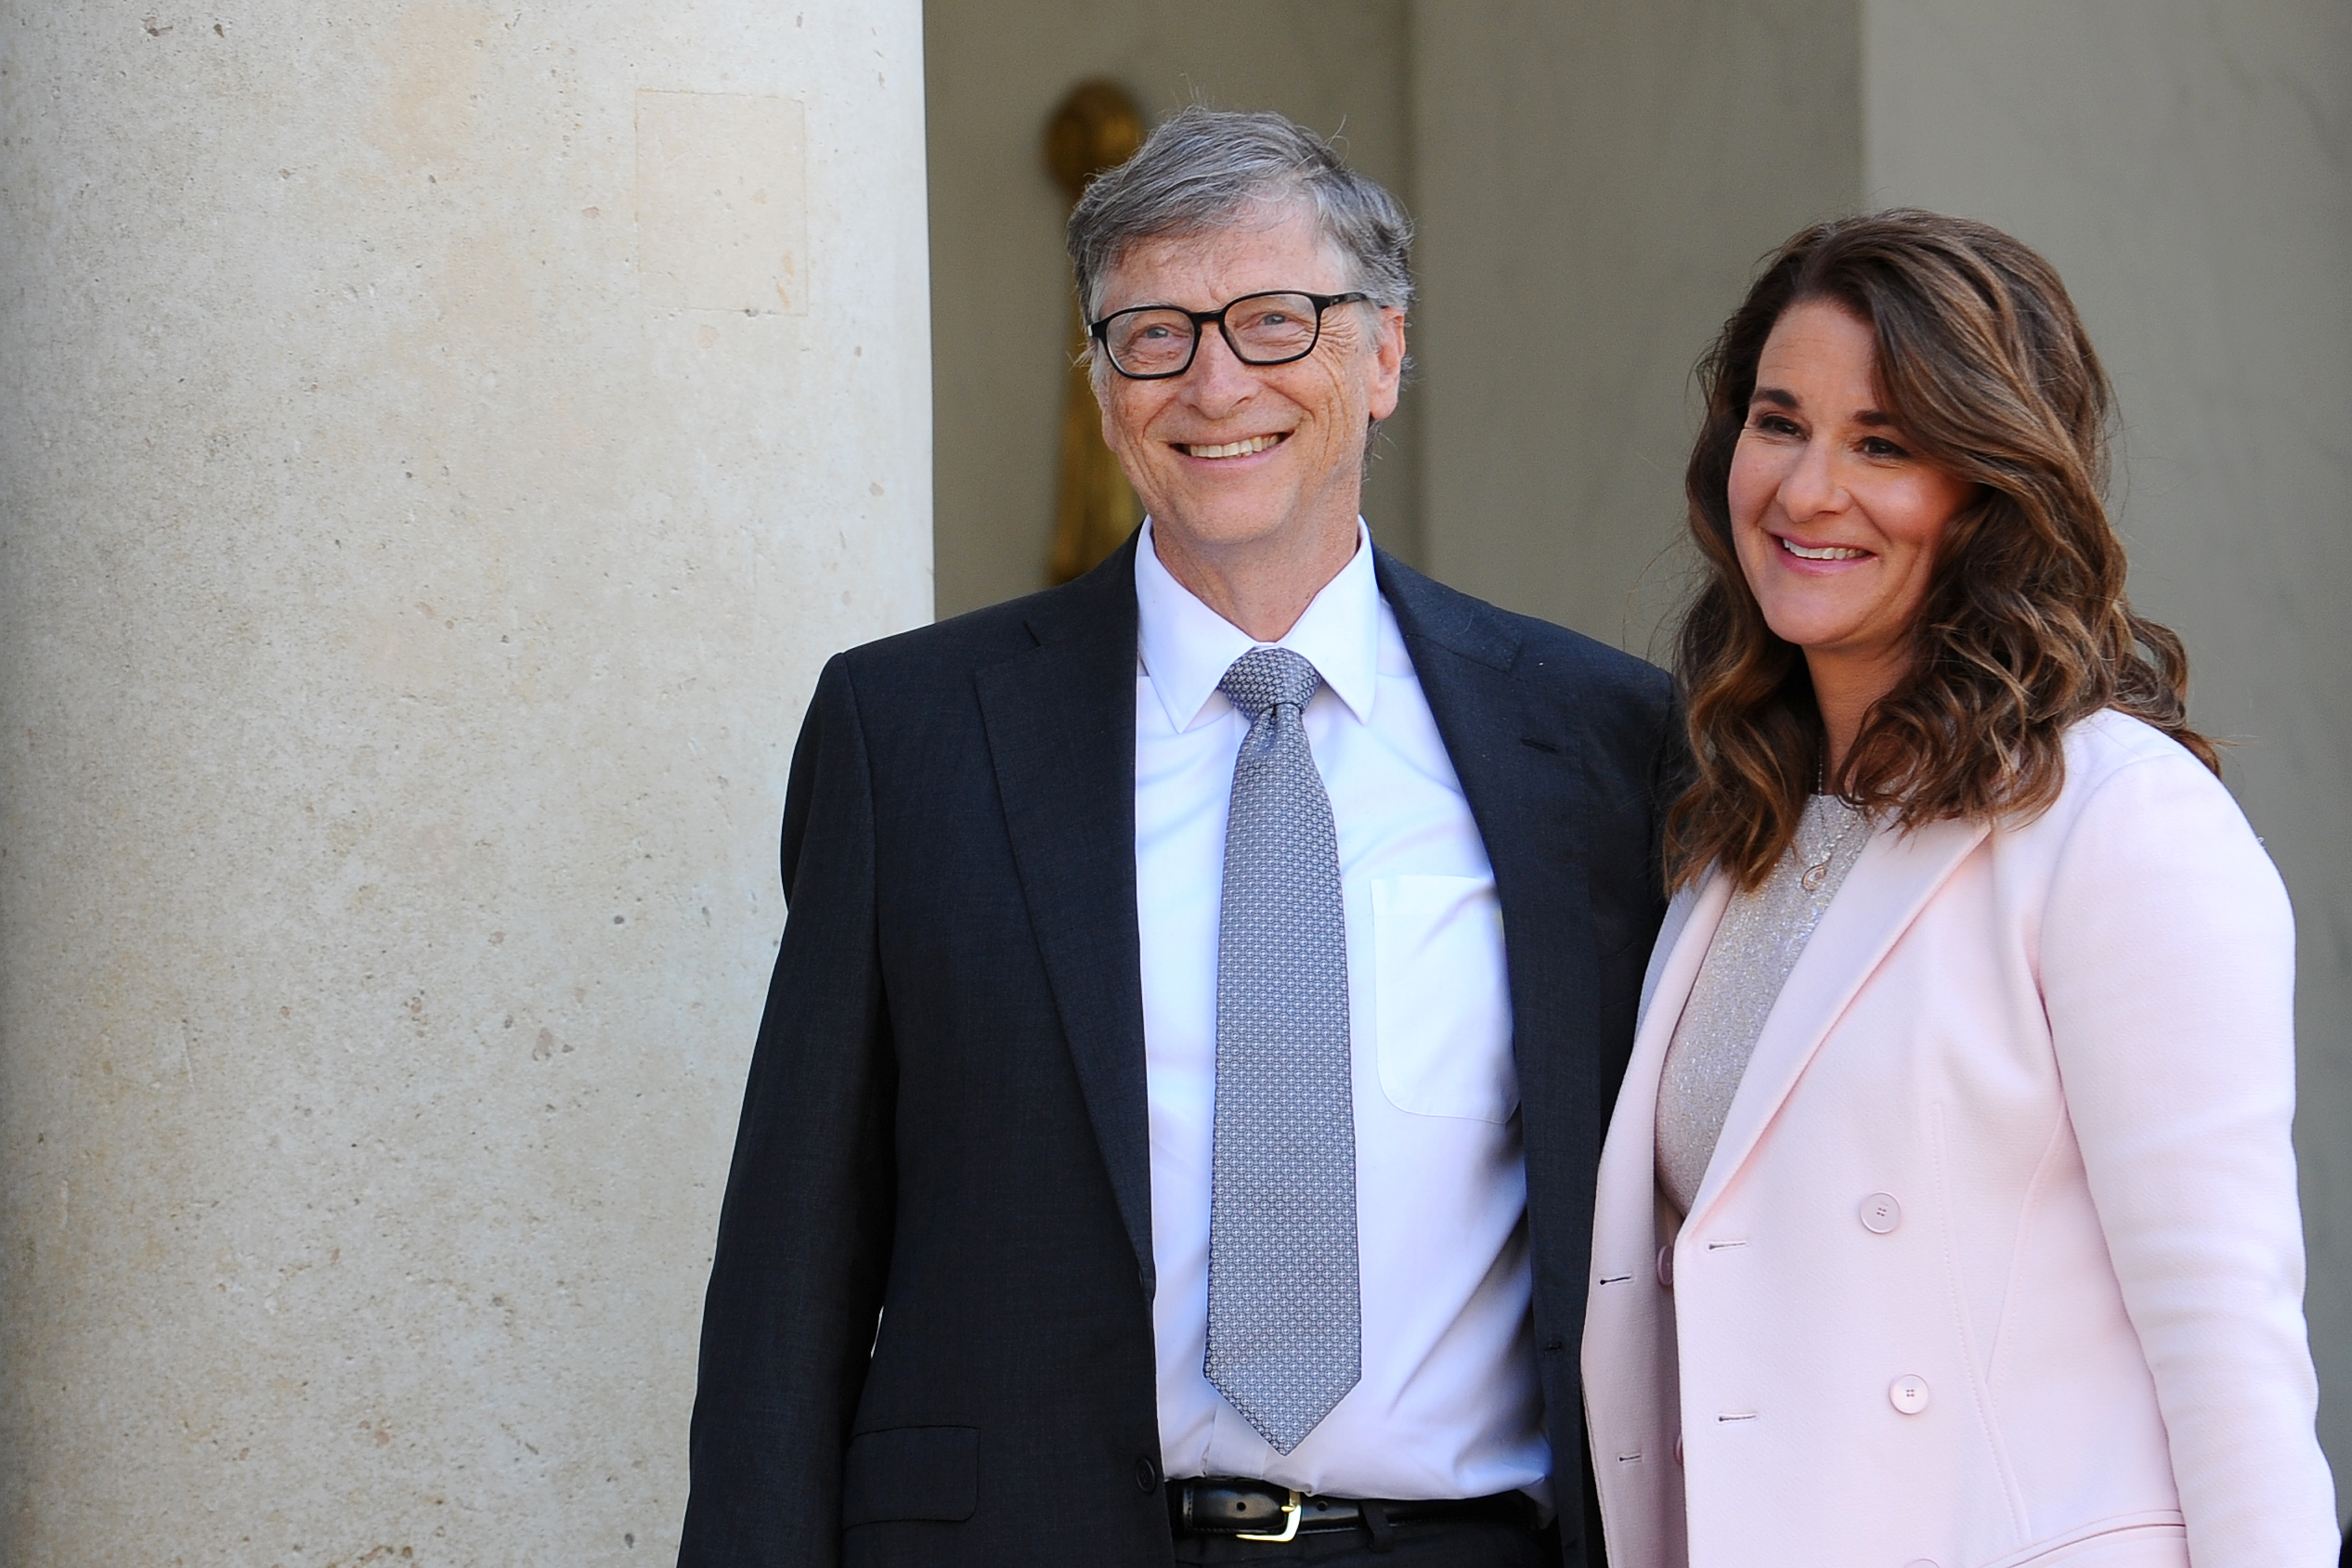 Bill and Melinda Gates pose in front of the Elysee Palace before receiving the award of Commander of the Legion of Honor. (Frederic Stevens&mdash;Getty Images)